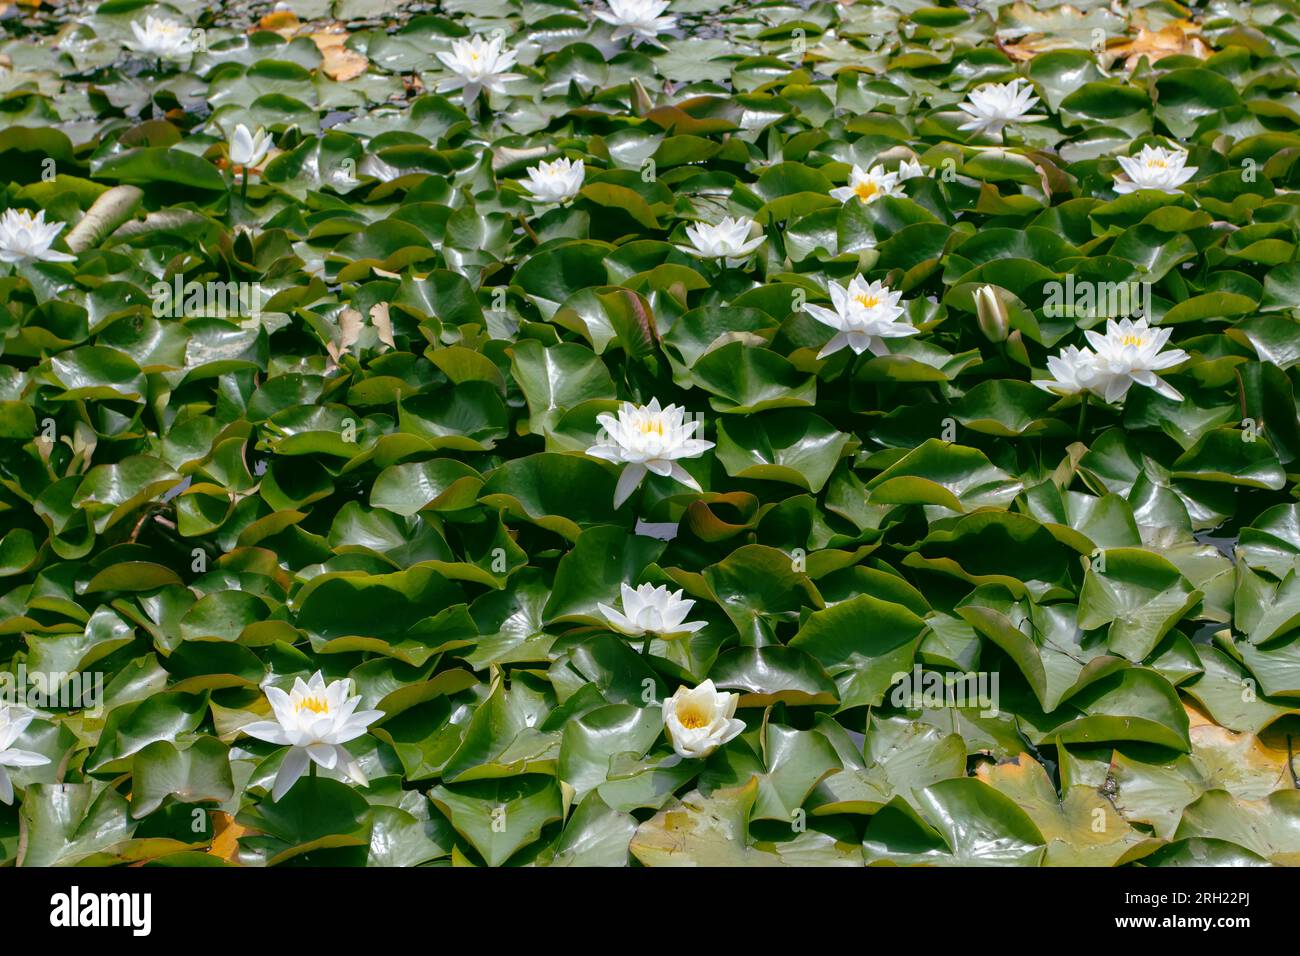 Fragrant white water lily flowers and leaves on the water surface. Nymphaea odorata aquatic plants in the pond. Stock Photo